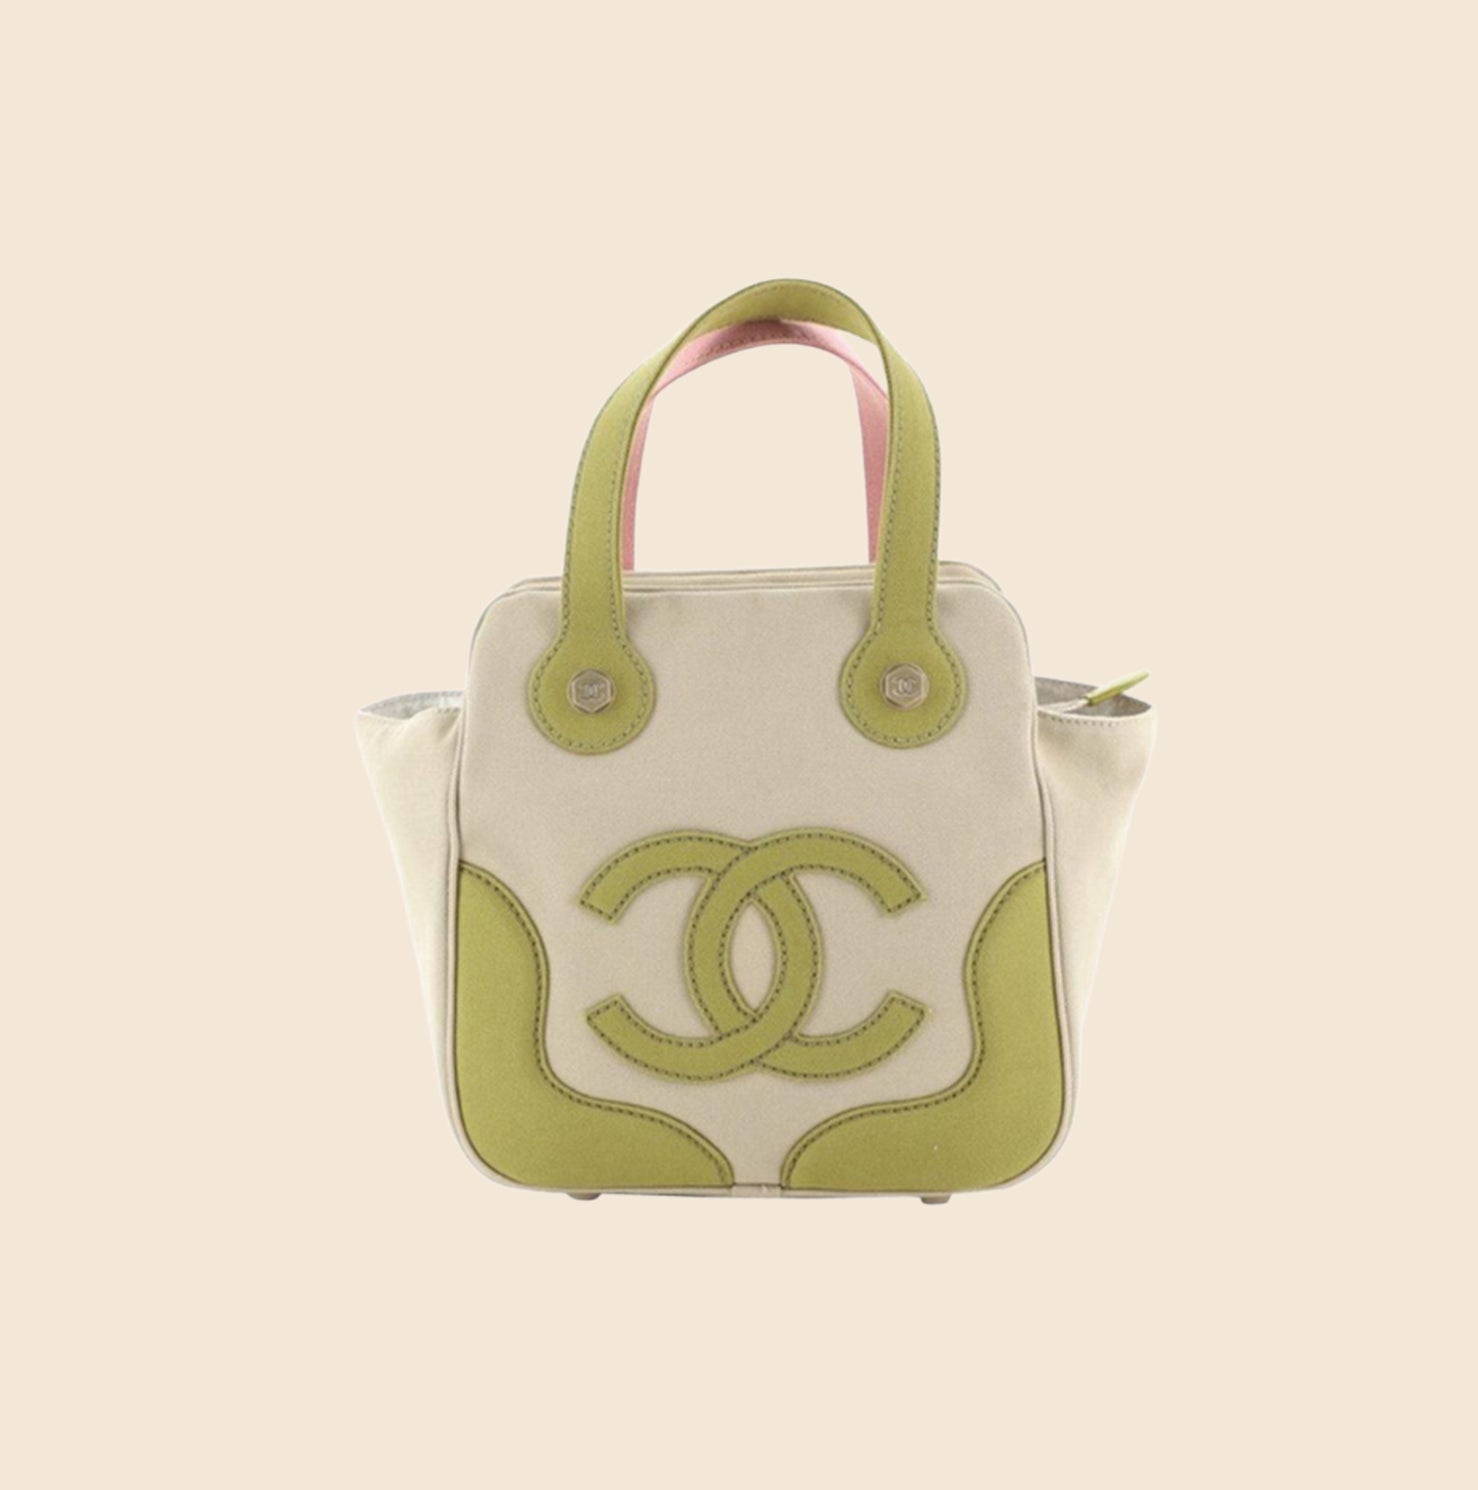 CHANEL, Bags, Authentic Chanel Tote Bag